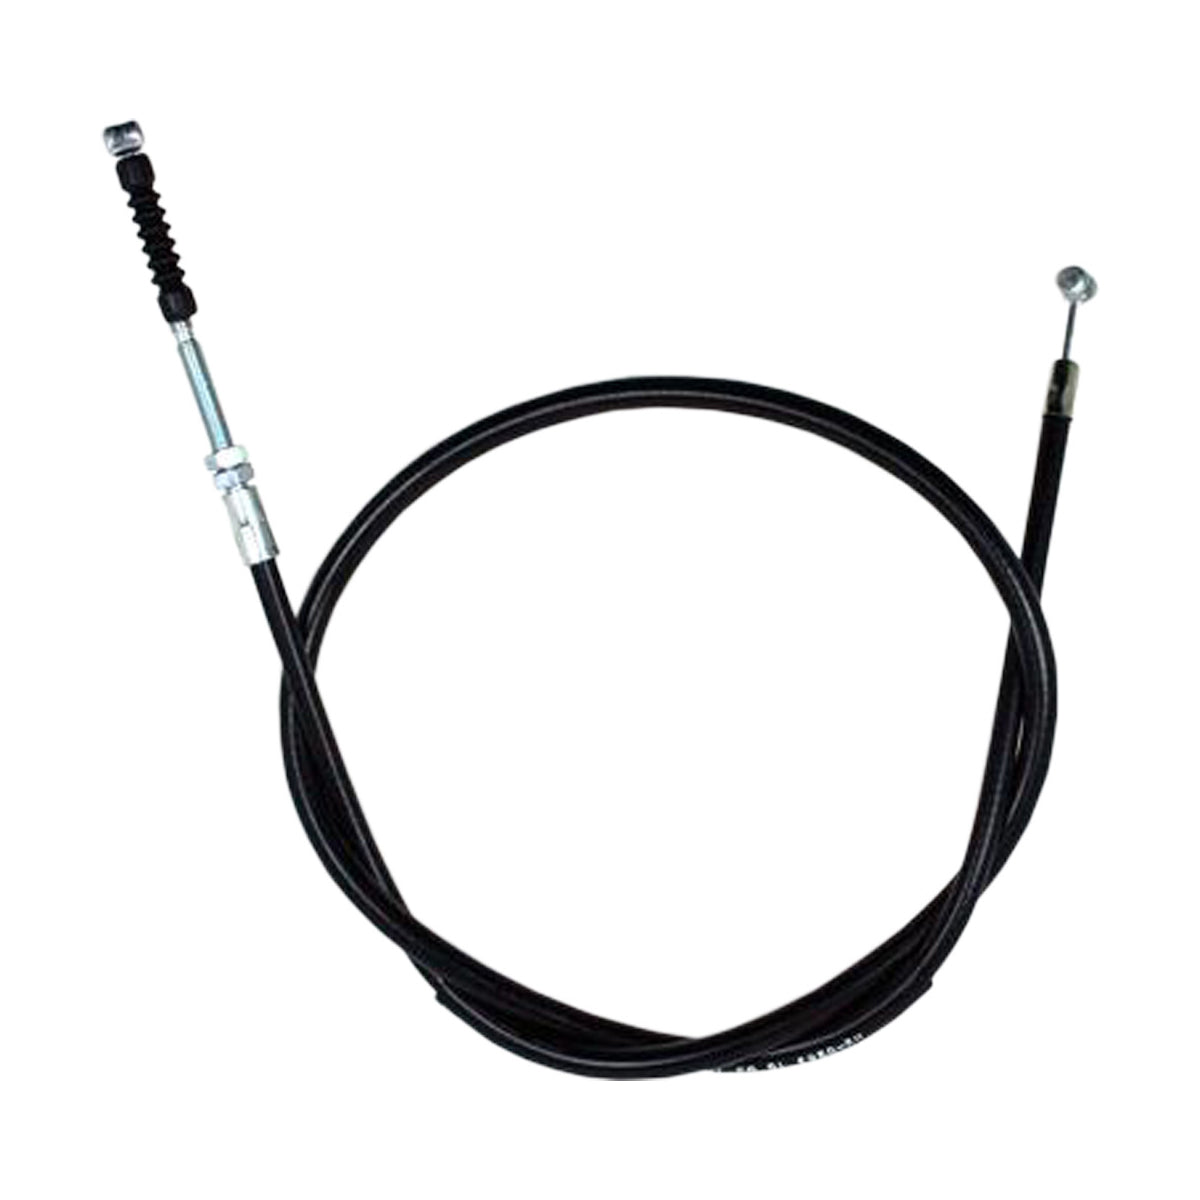 Motion Pro CRF110 Brake Cable +4.5"